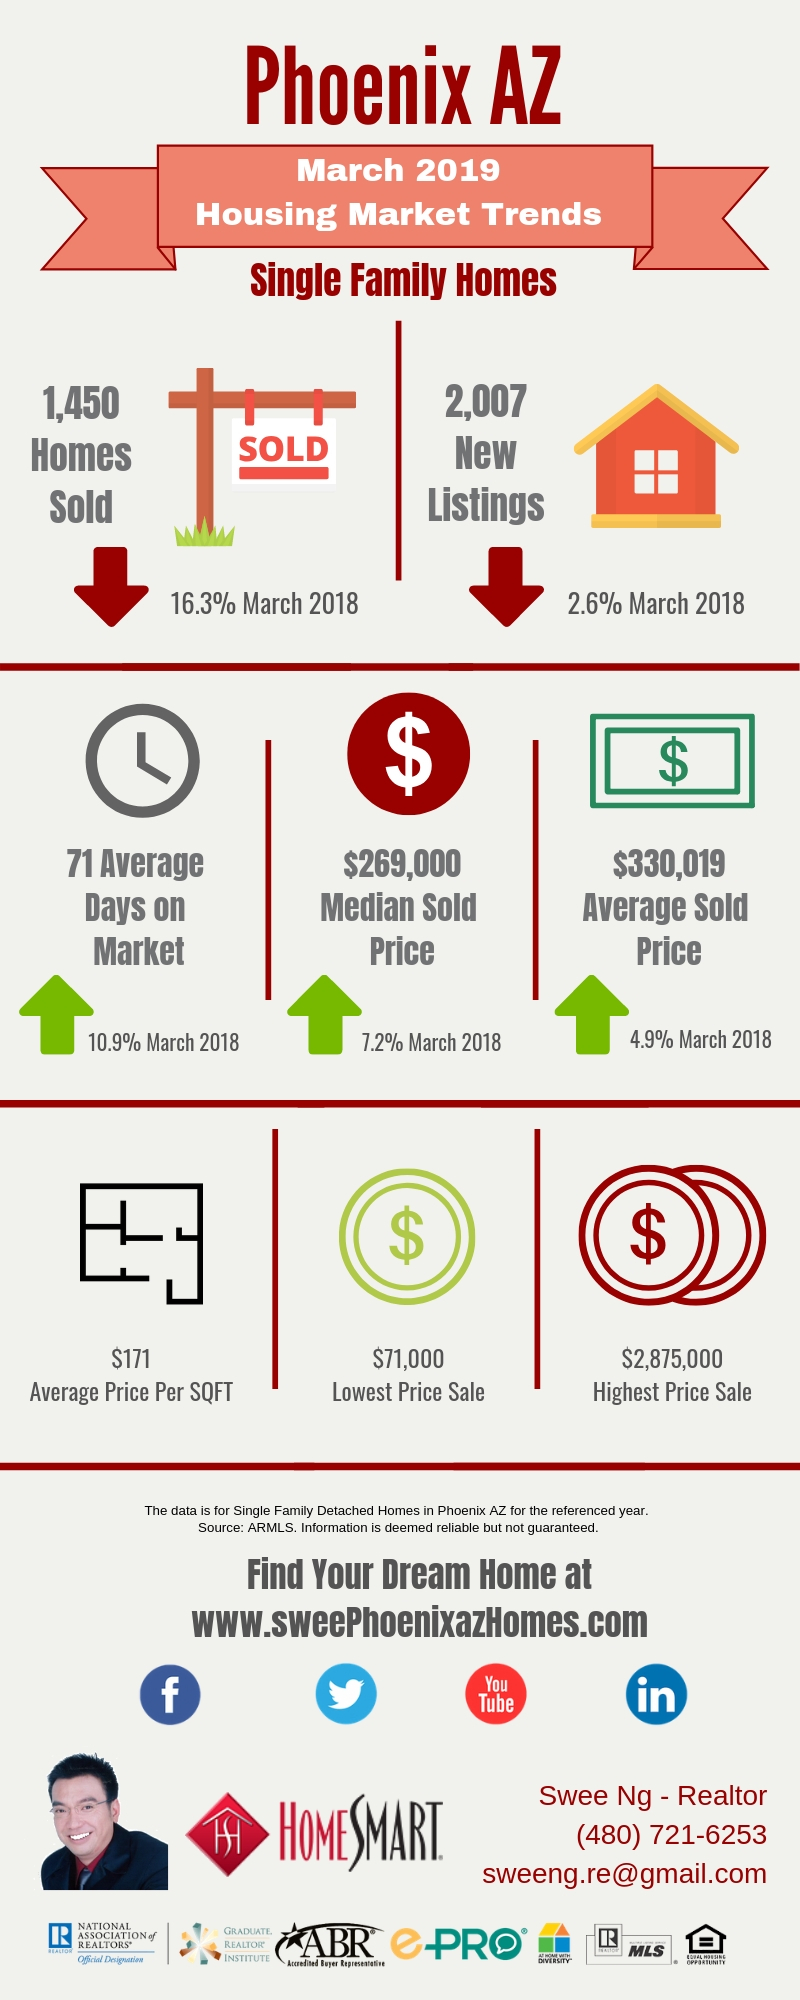 Phoenix AZ Housing Market Trends Report March 2019 by Swee Ng